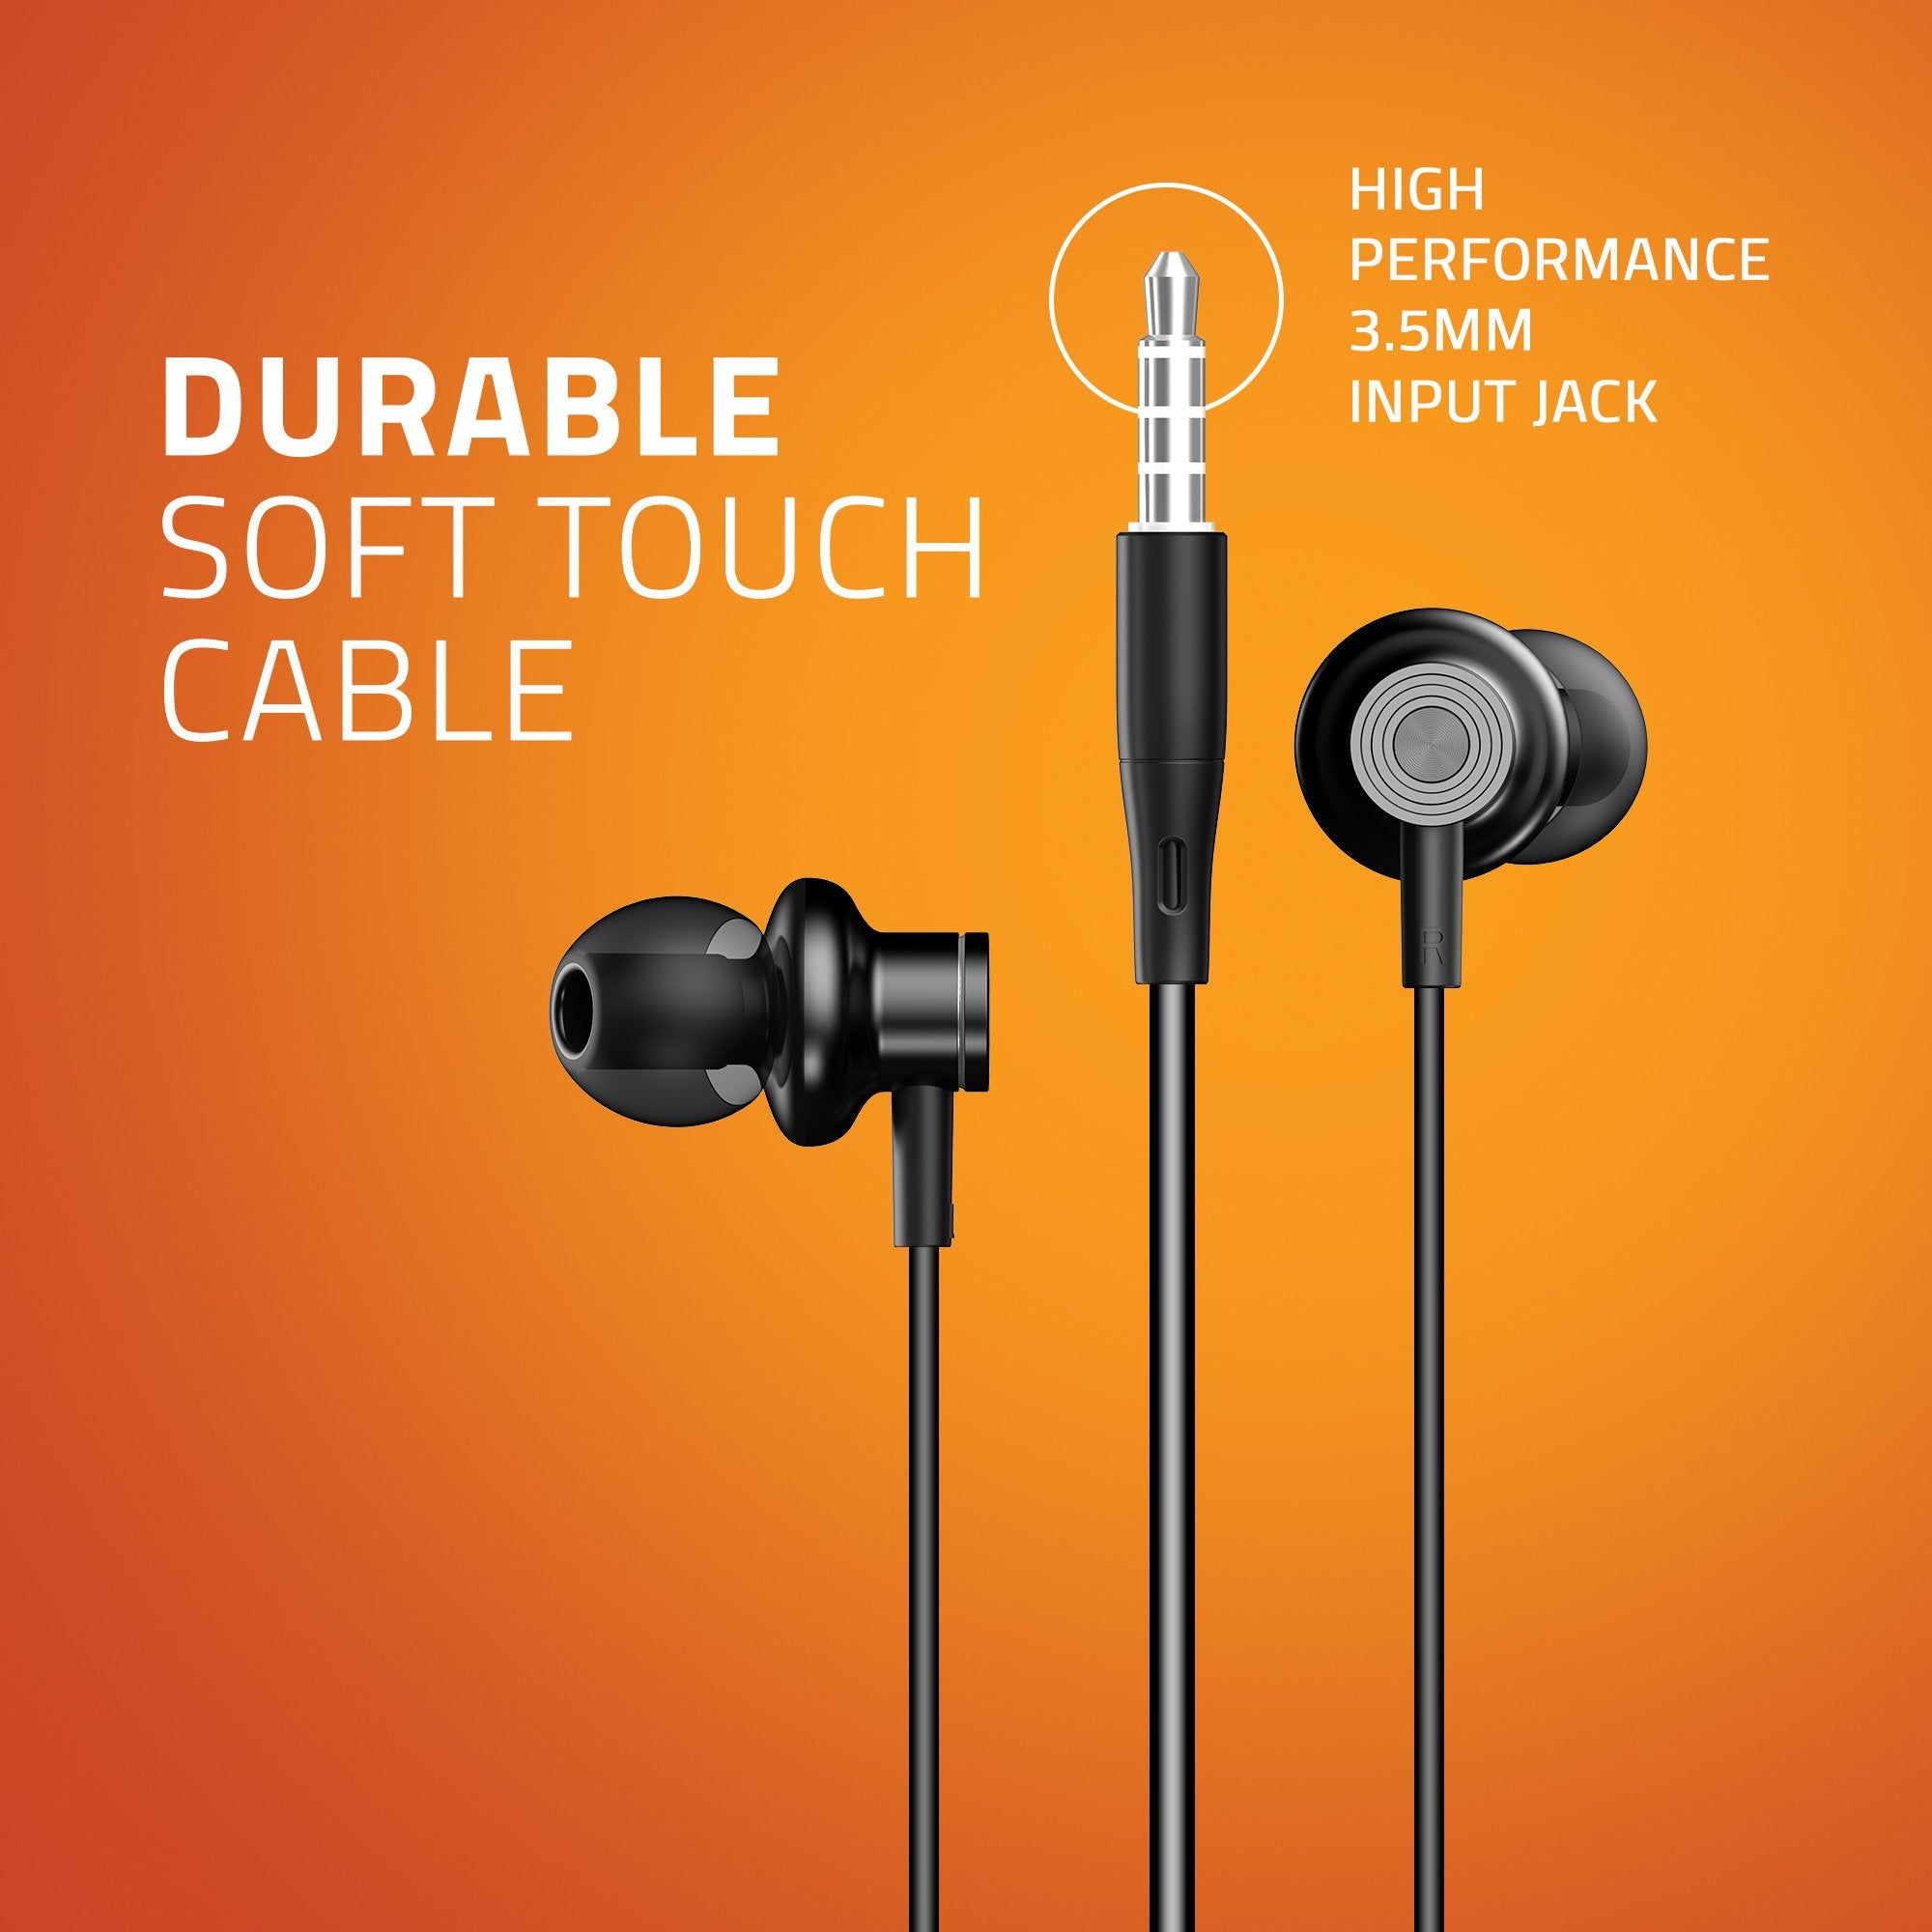 Artis E600M Earphones With Mic - Durable Soft touch Cable